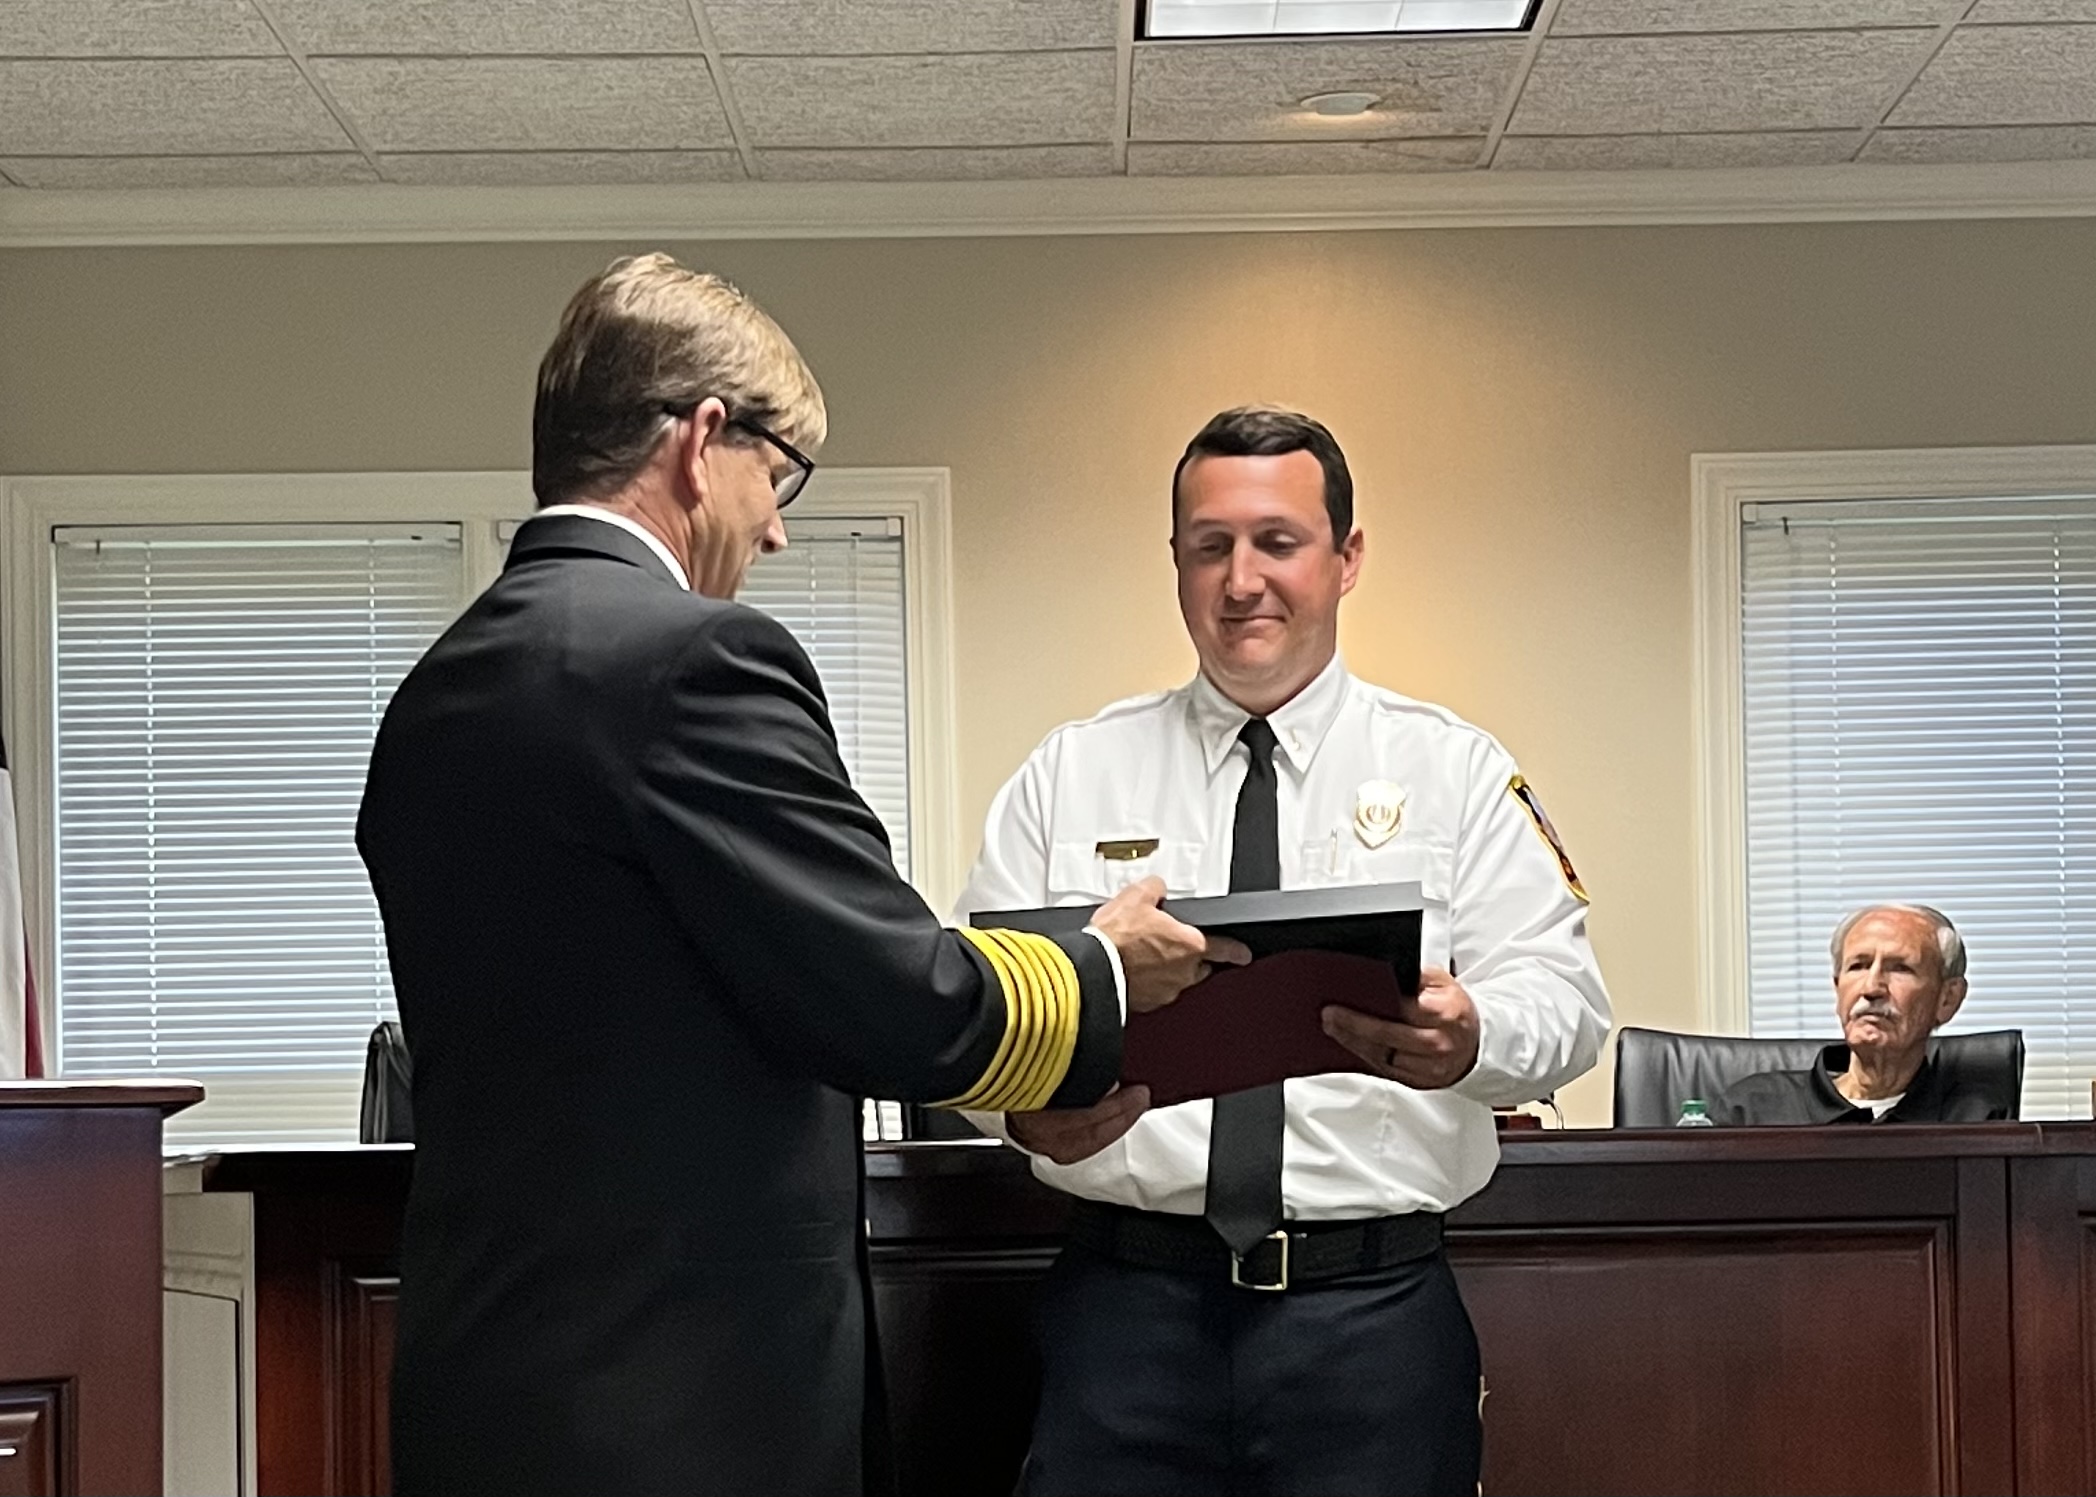 Center Point Fire District recognizes exemplary firefighter and crew at CPFD Board meeting